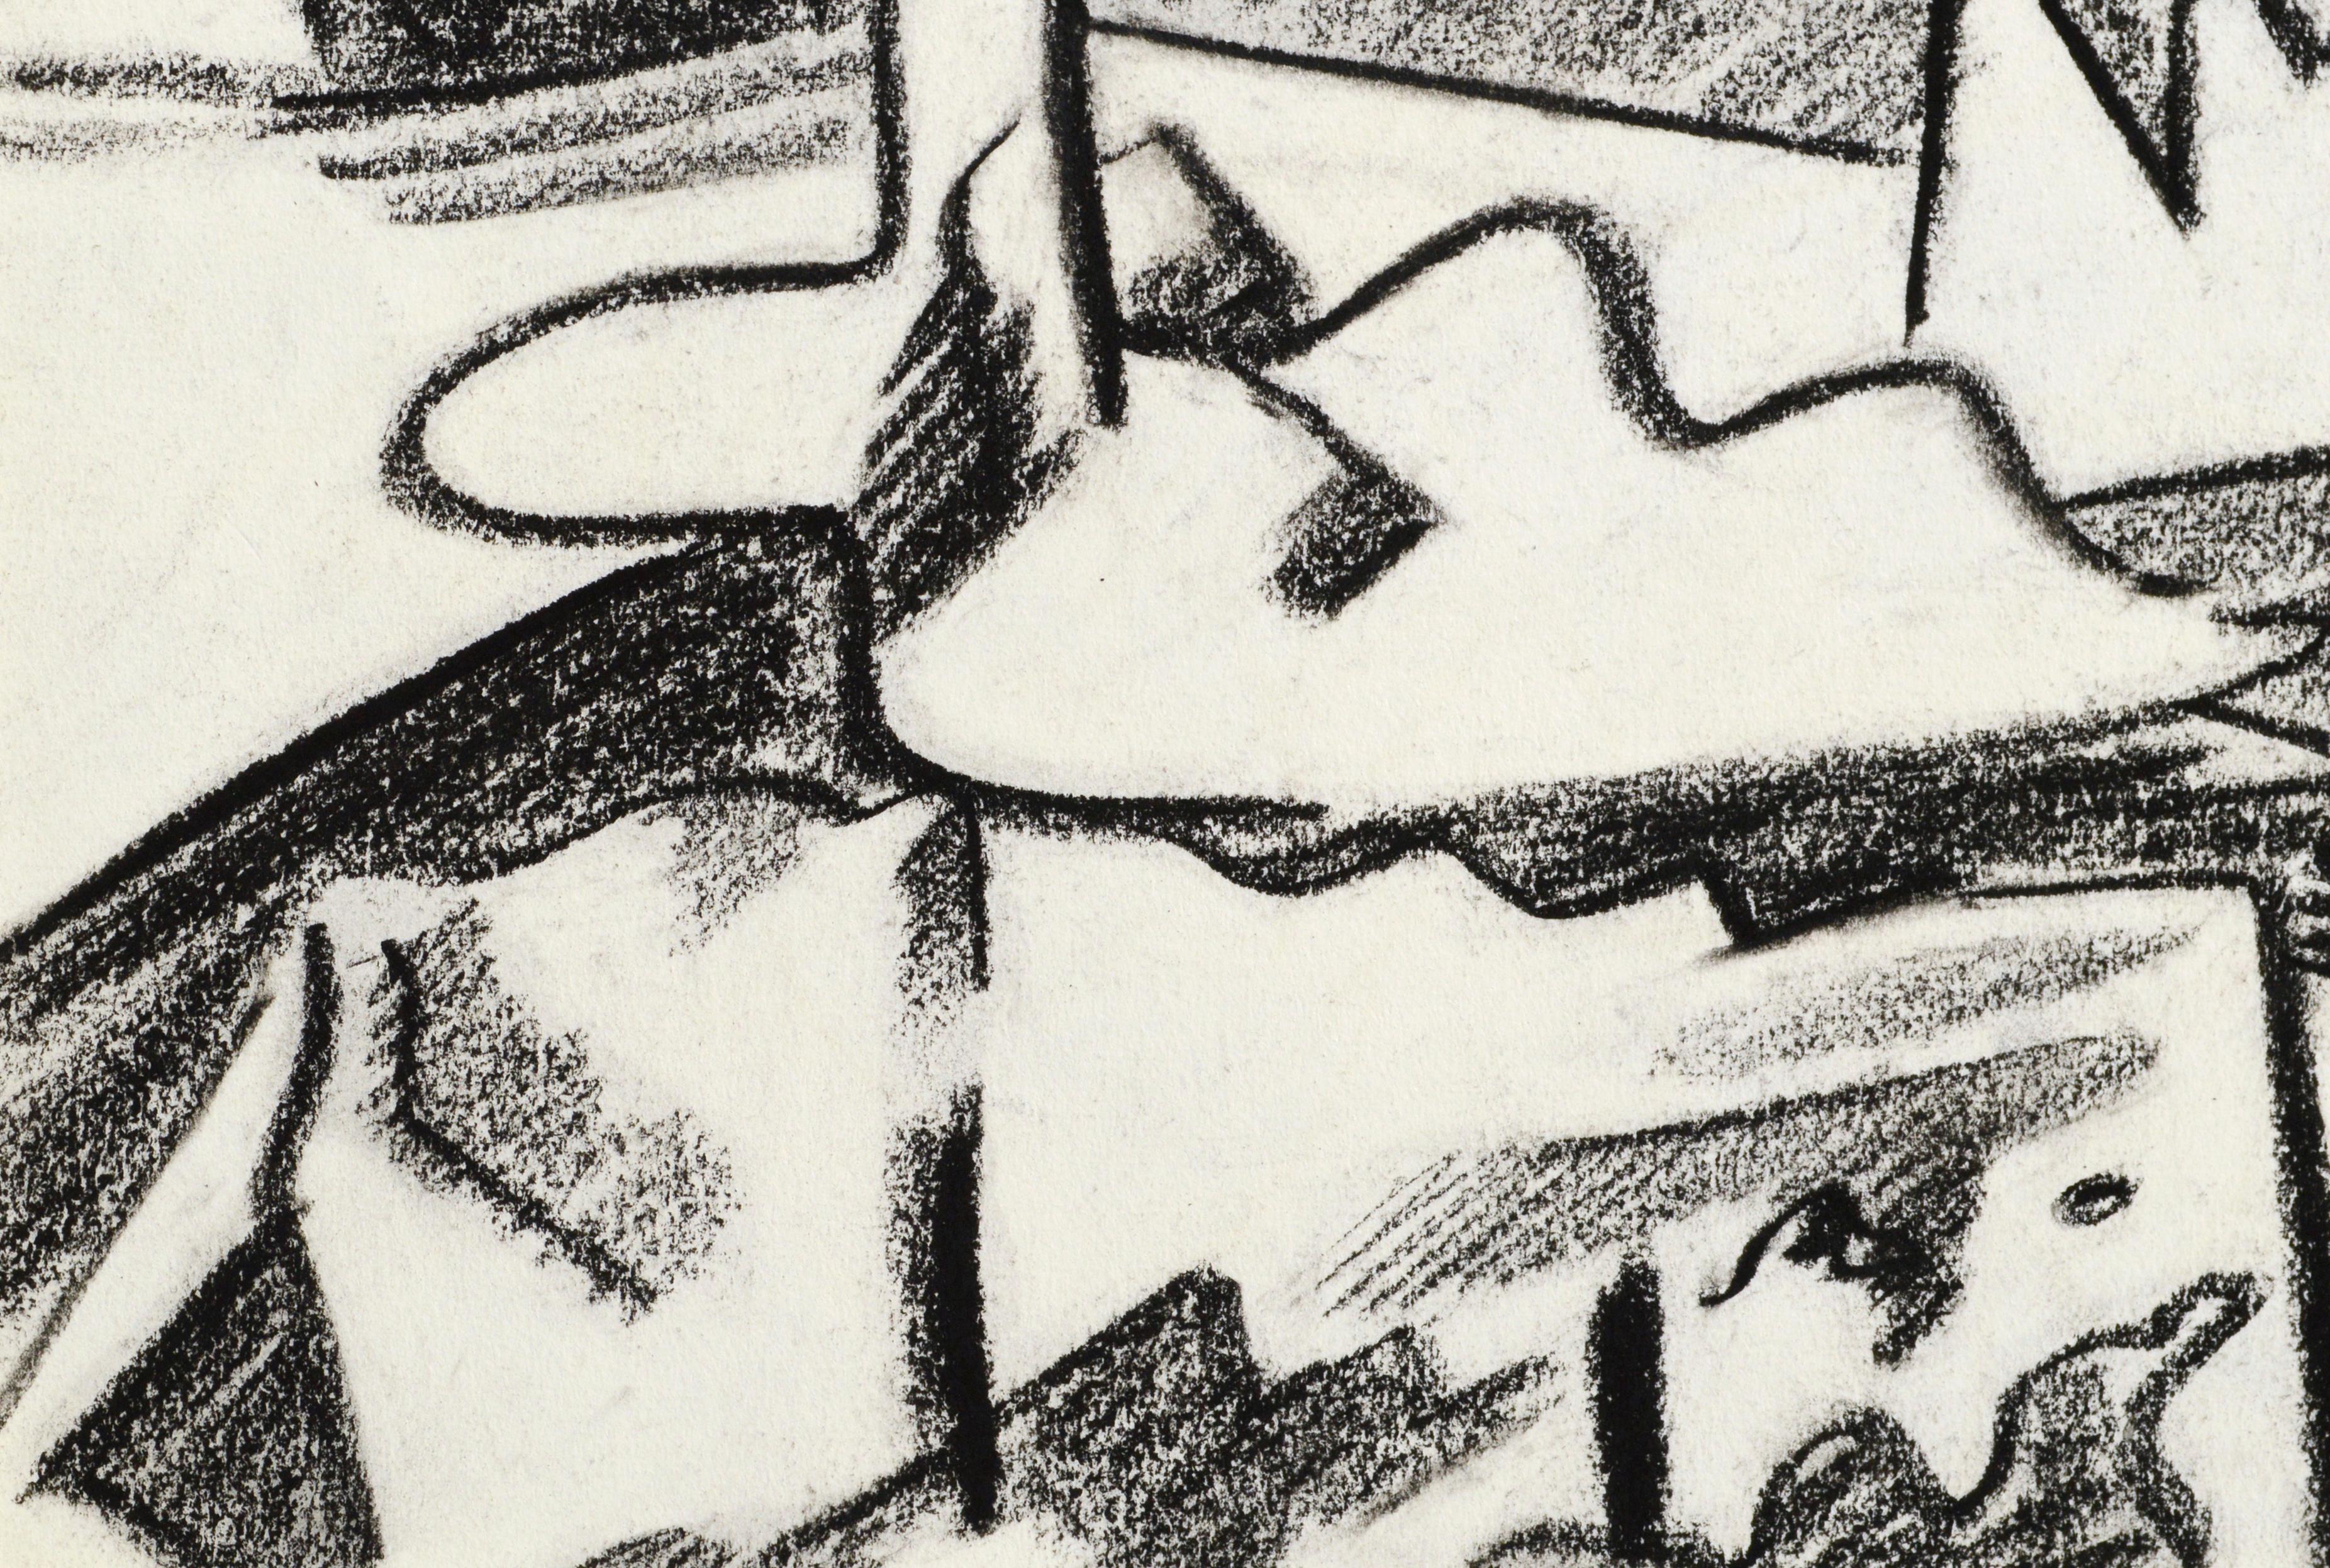 Bold abstract black and white pastel landscape drawing by Erle Loran (American, 1905-1999). Unsigned, but was acquired from the estate of the artist. Presented in a new black mat with foam core backing. Provenance: Estate of Earle Loran; David